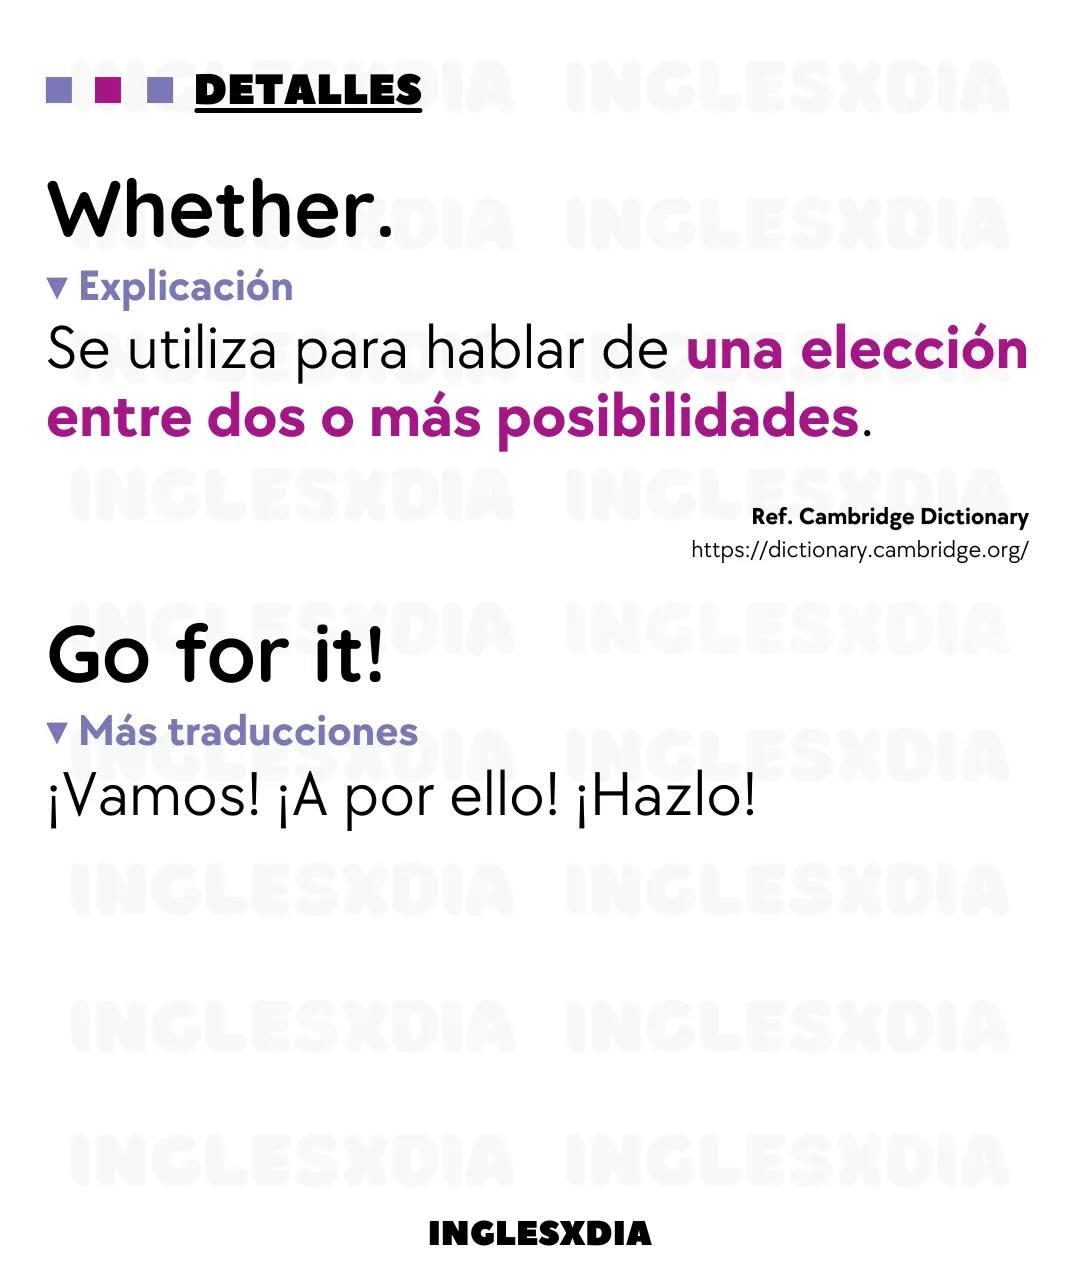 Frases motivadoras en inglés: Go for it! Whether it ends good or  bad, it was an experience.